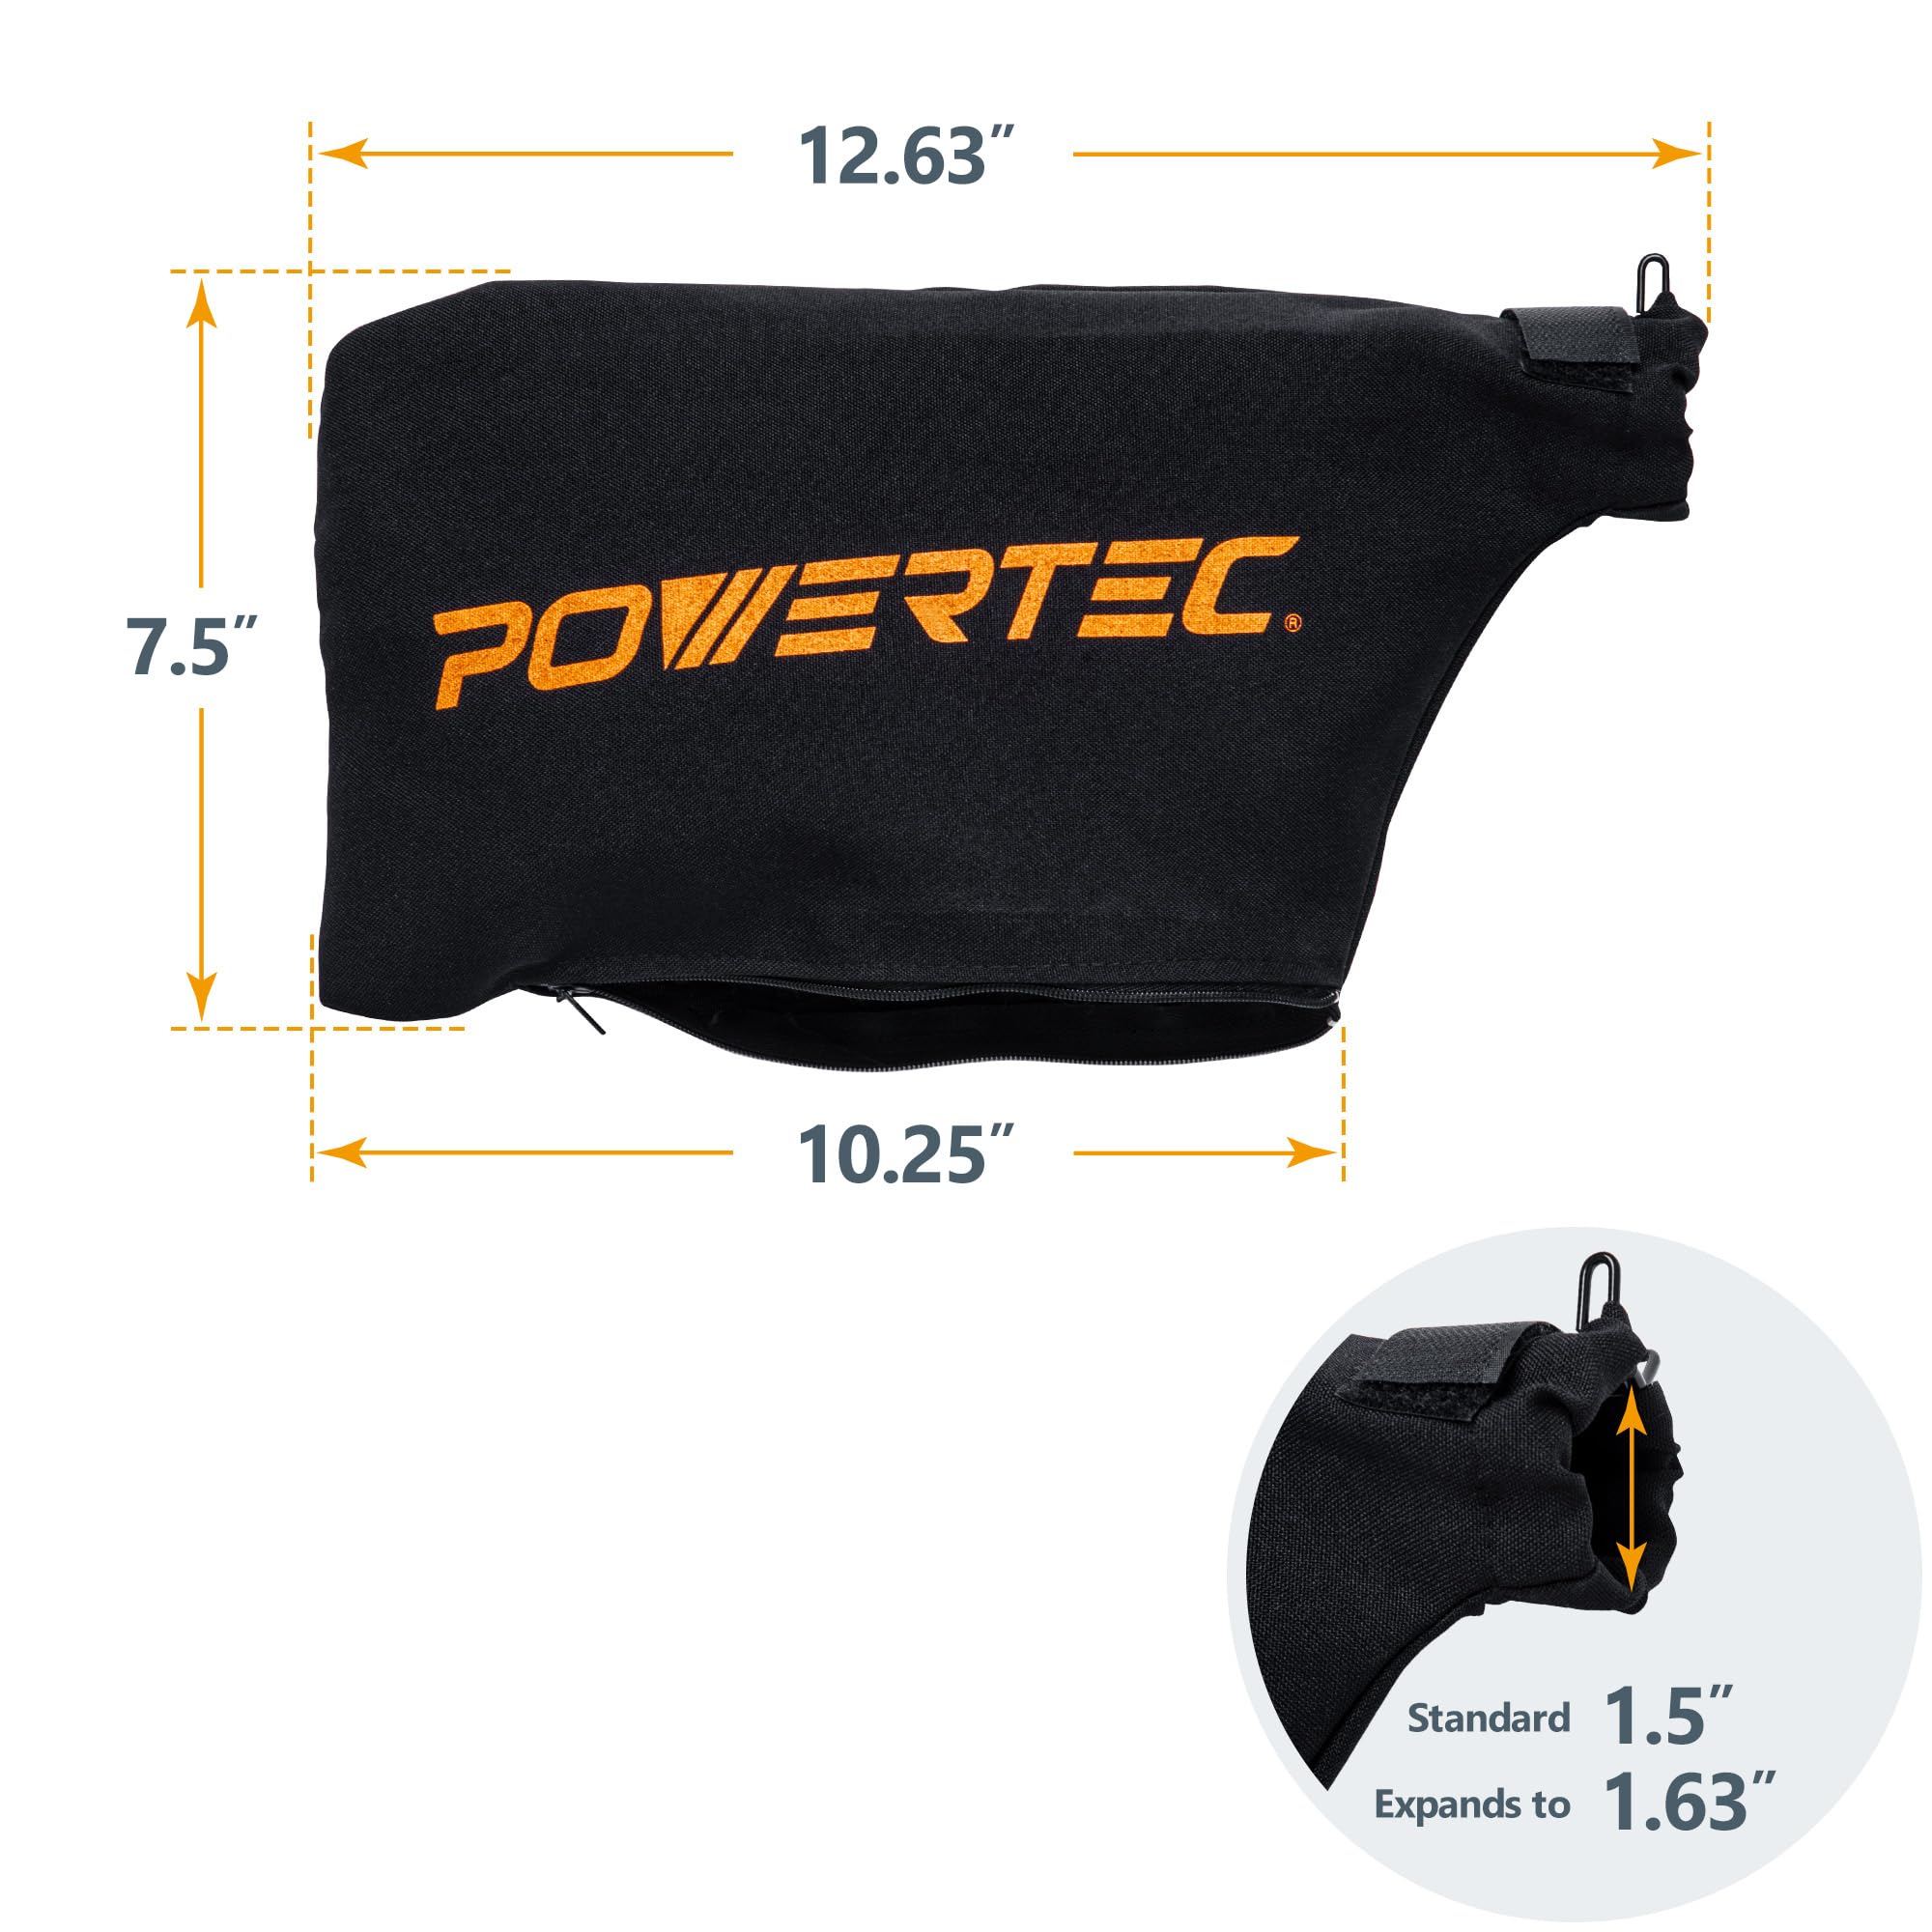 POWERTEC 75081 Miter Saw/Track Saw Dust Bag fits Nominal 1-1/2